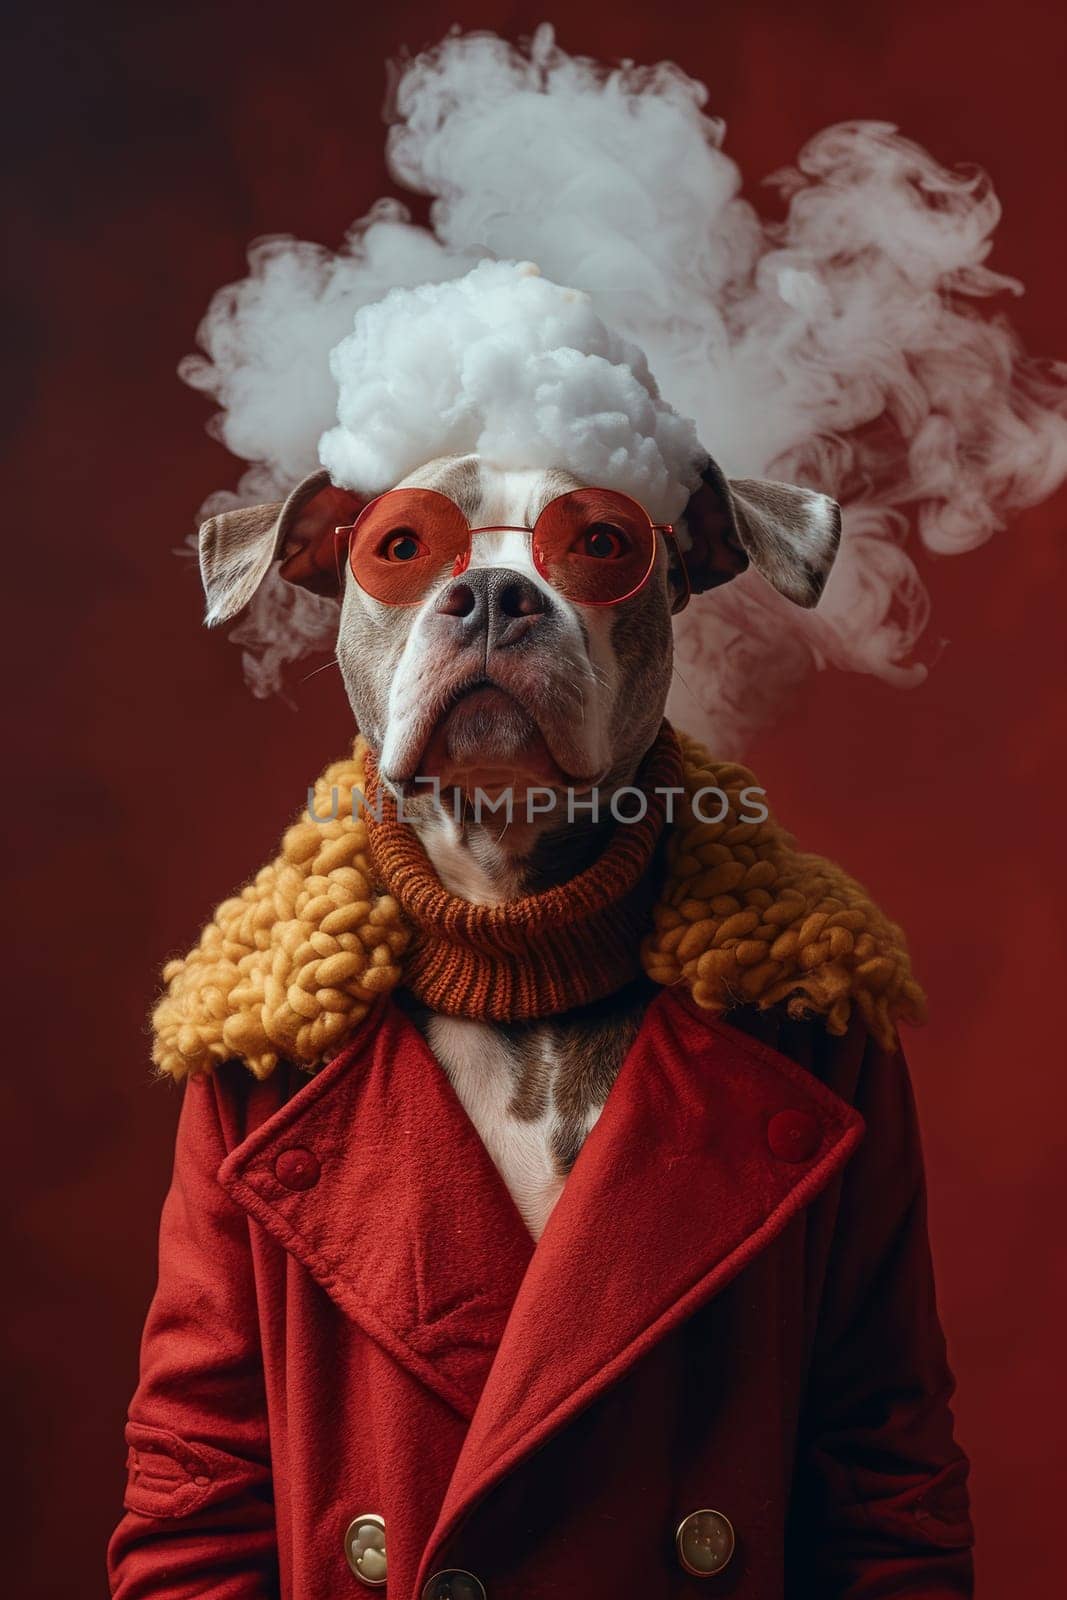 A dog is wearing a red coat and sunglasses and is surrounded by smoke. The dog appears to be posing for a photo, and the smoke adds a dramatic effect to the image